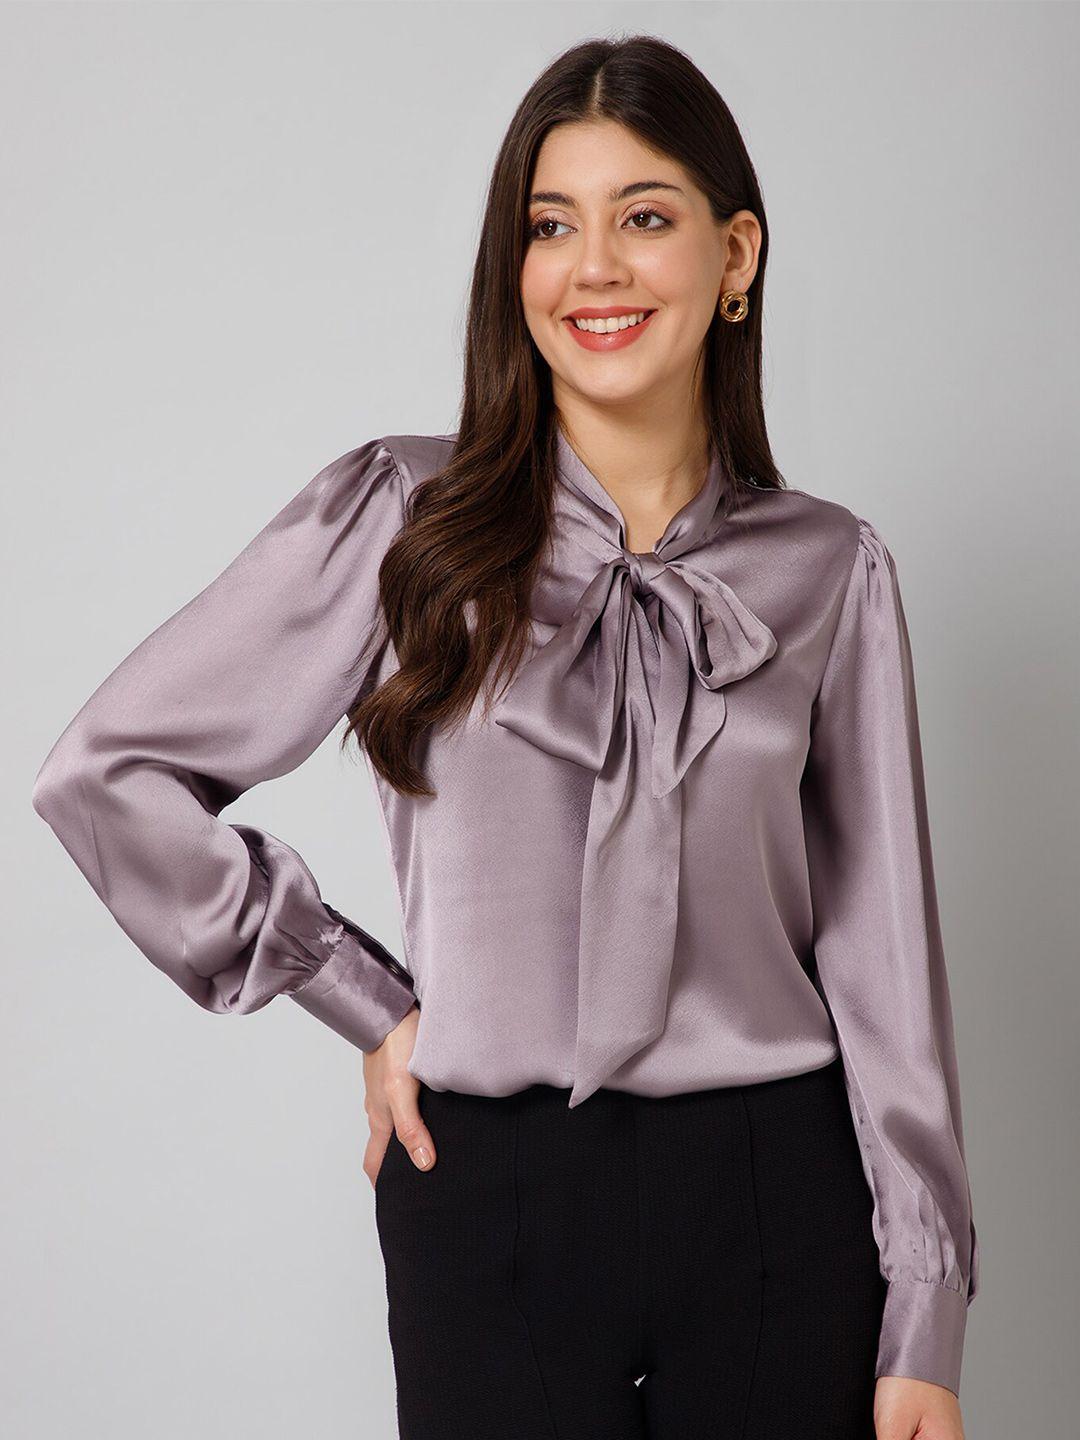 purys-tie-up-neck-cuffed-sleeves-satin-shirt-style-top